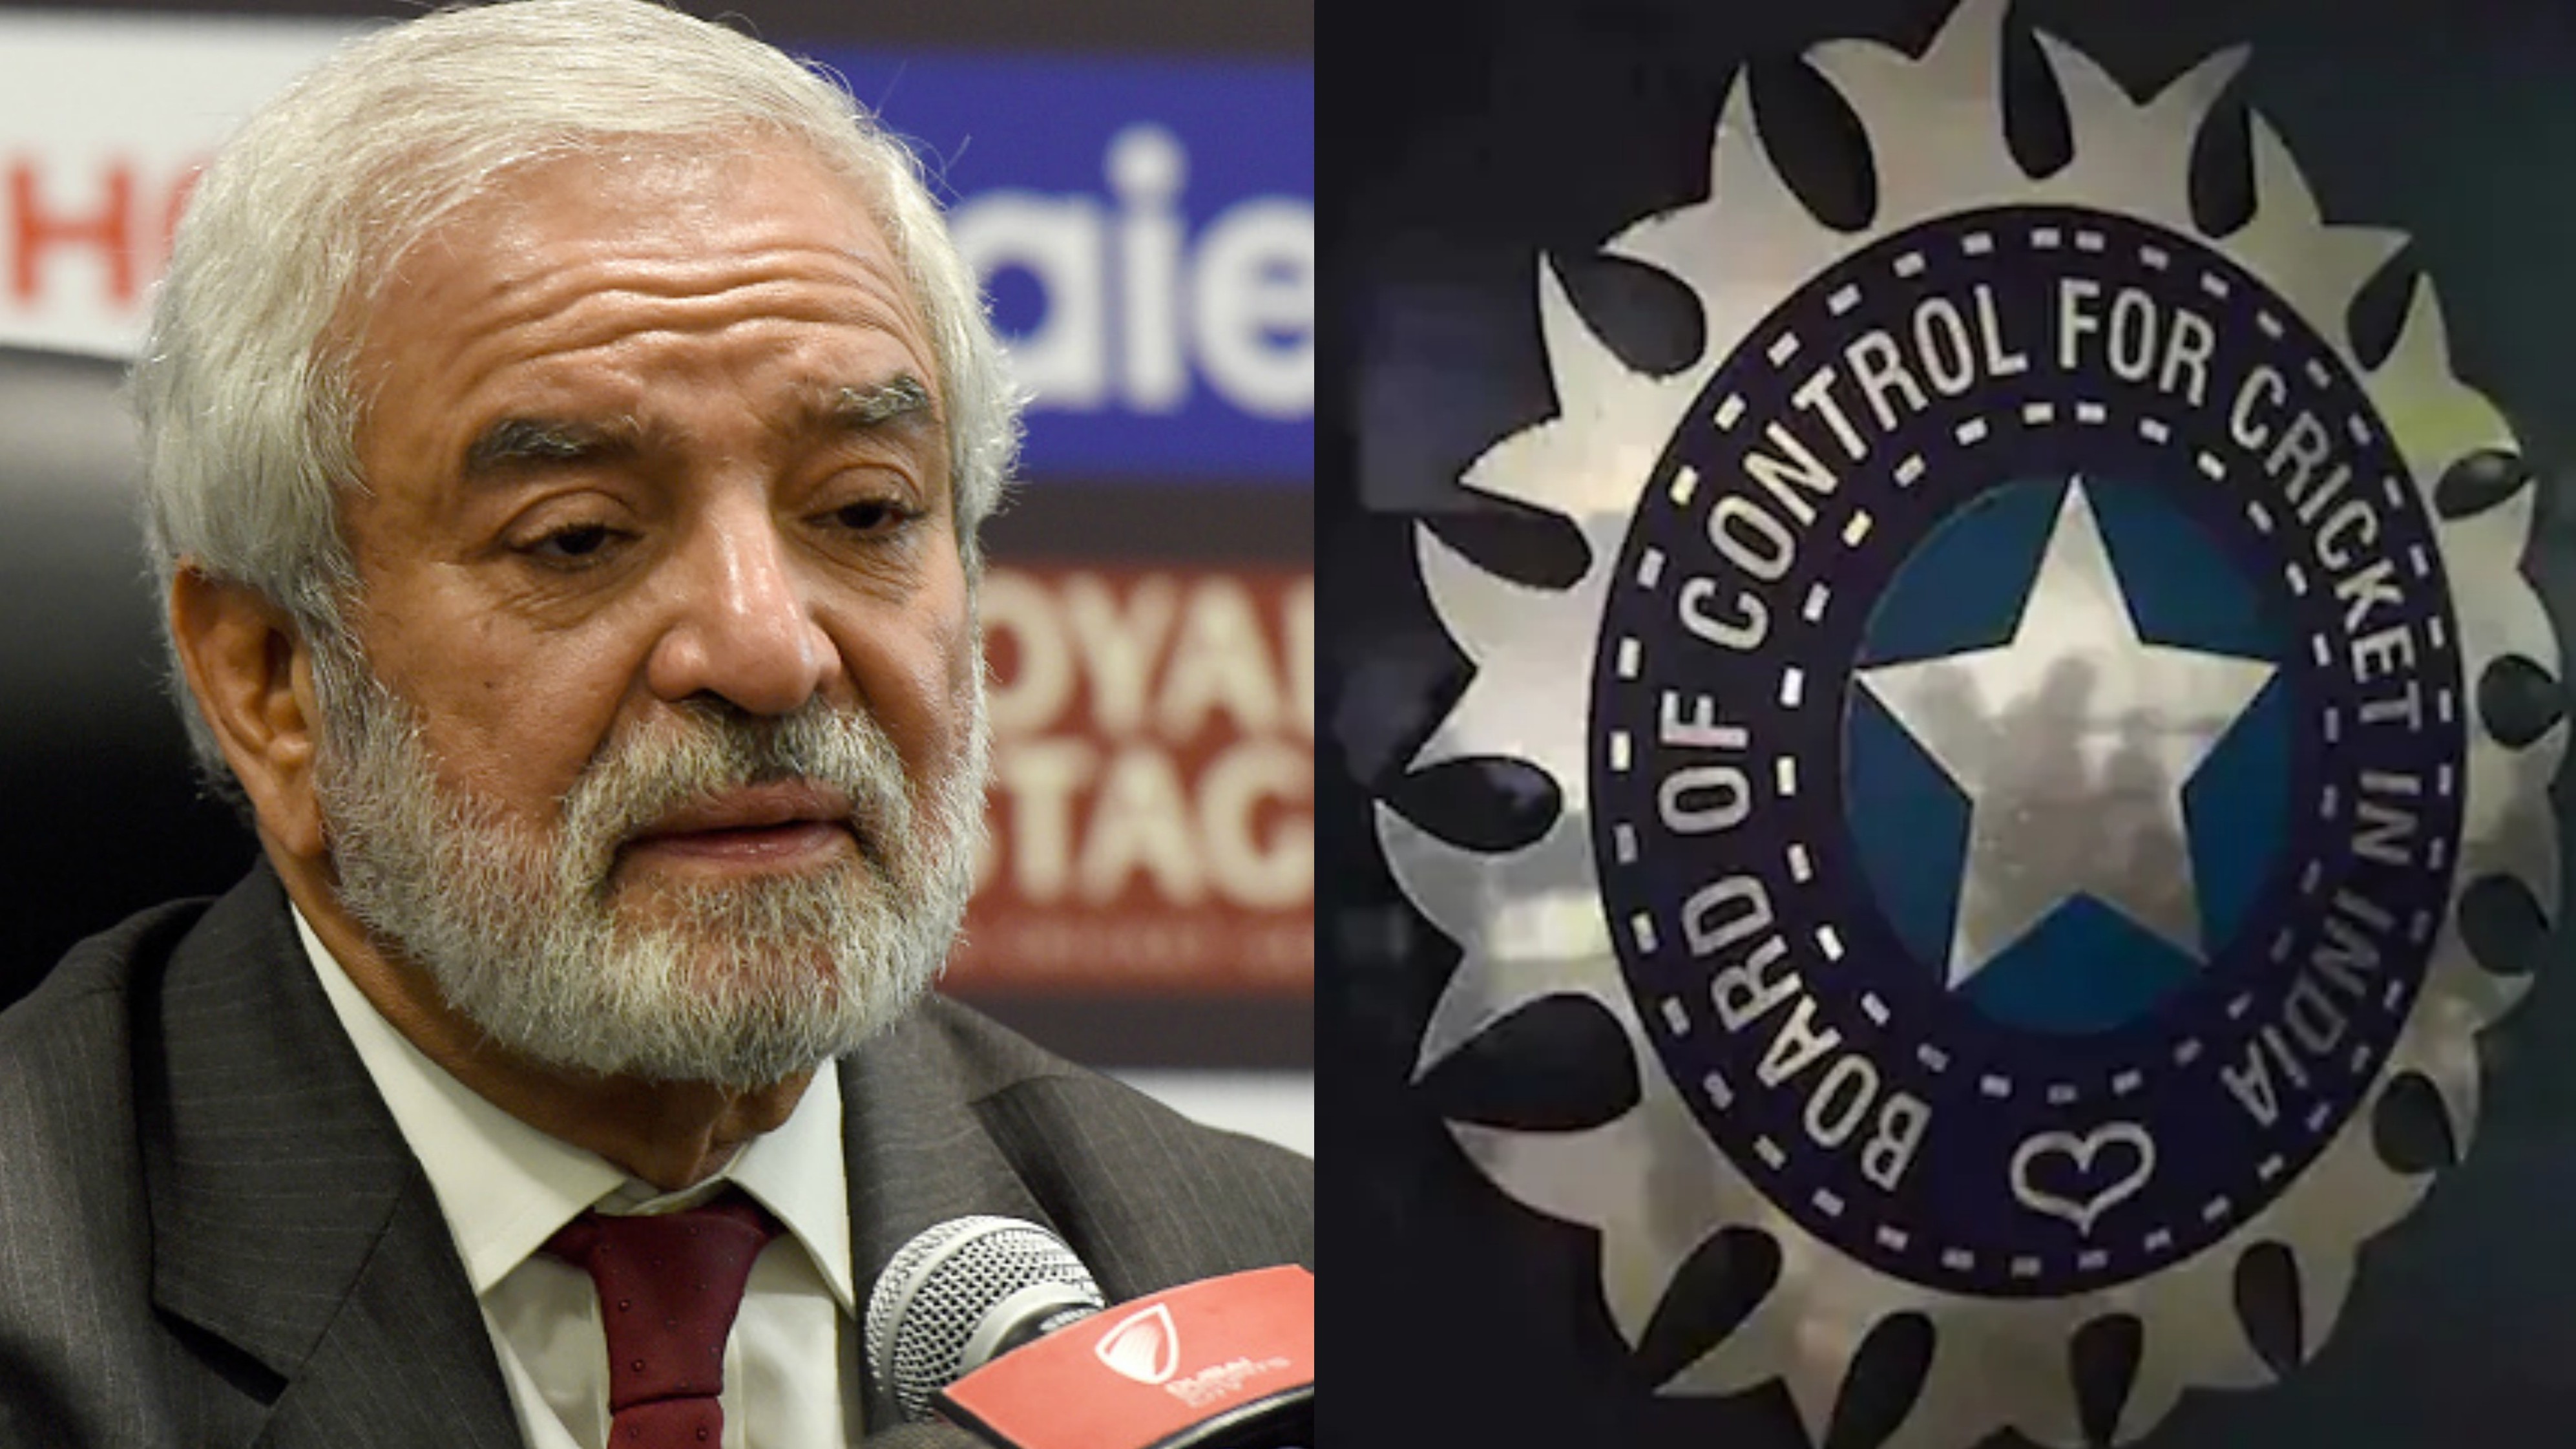 BCCI hits back at PCB chairman Mani for his controversial remark of calling India unsafe to tour